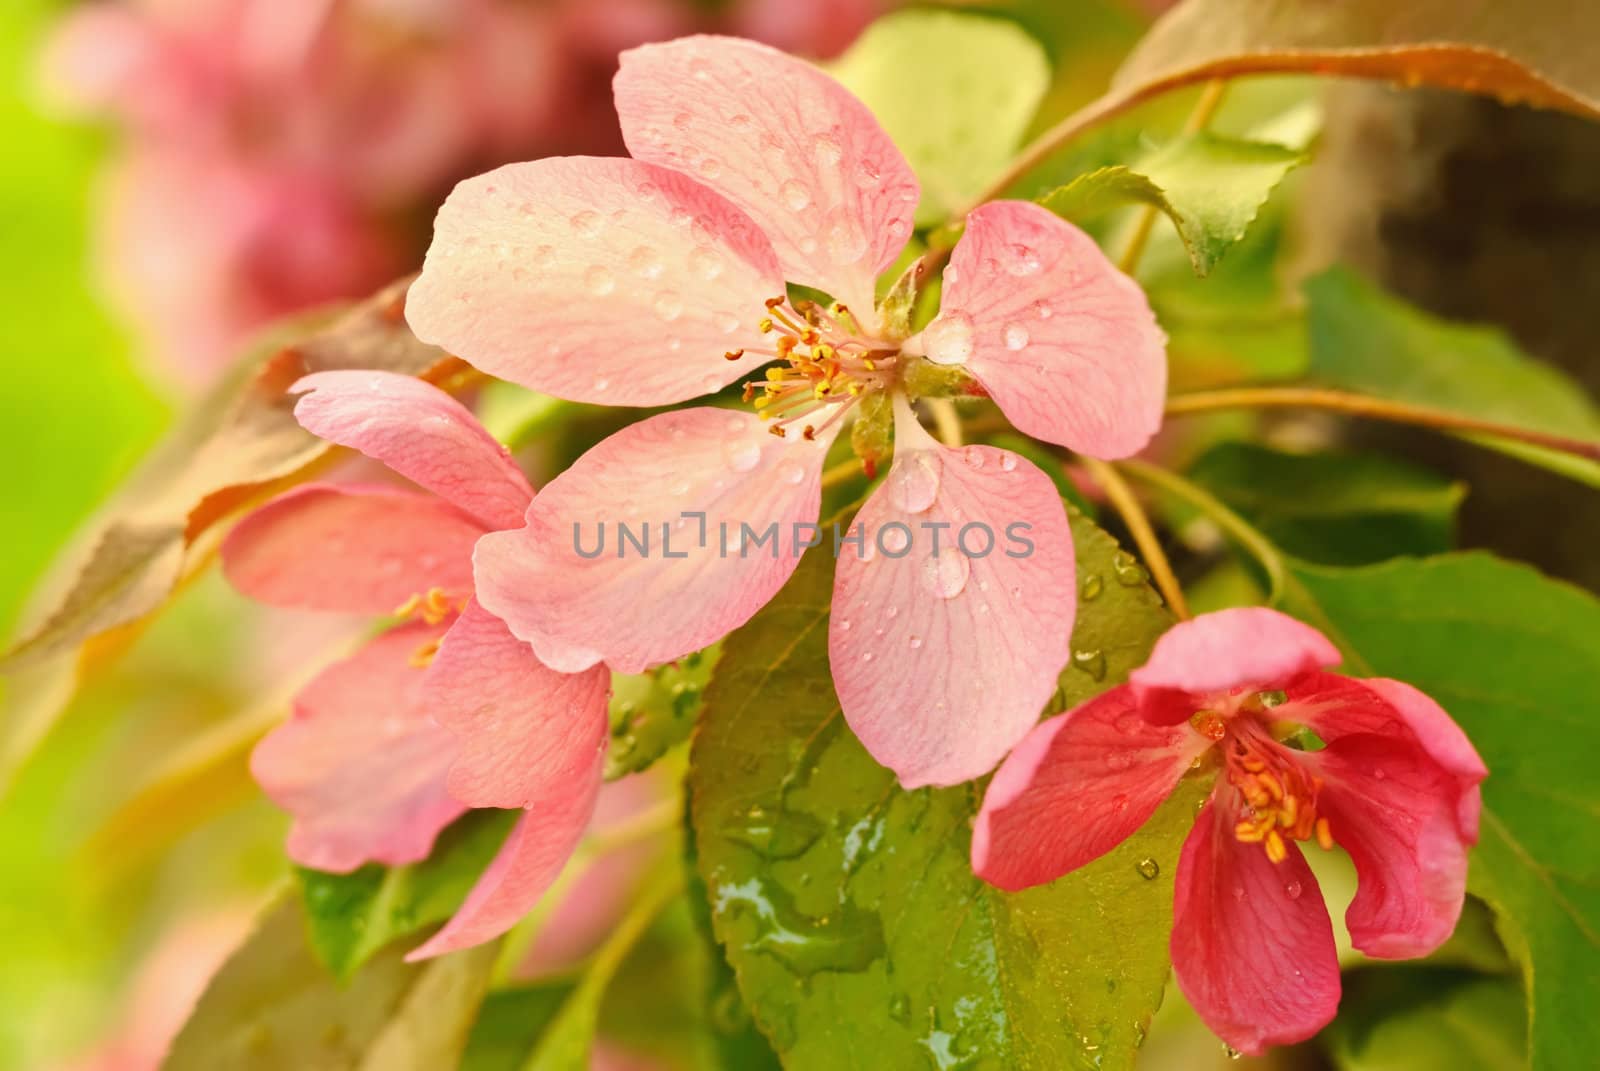 Pink flowers of apple- drops of rain on the leaves and petals